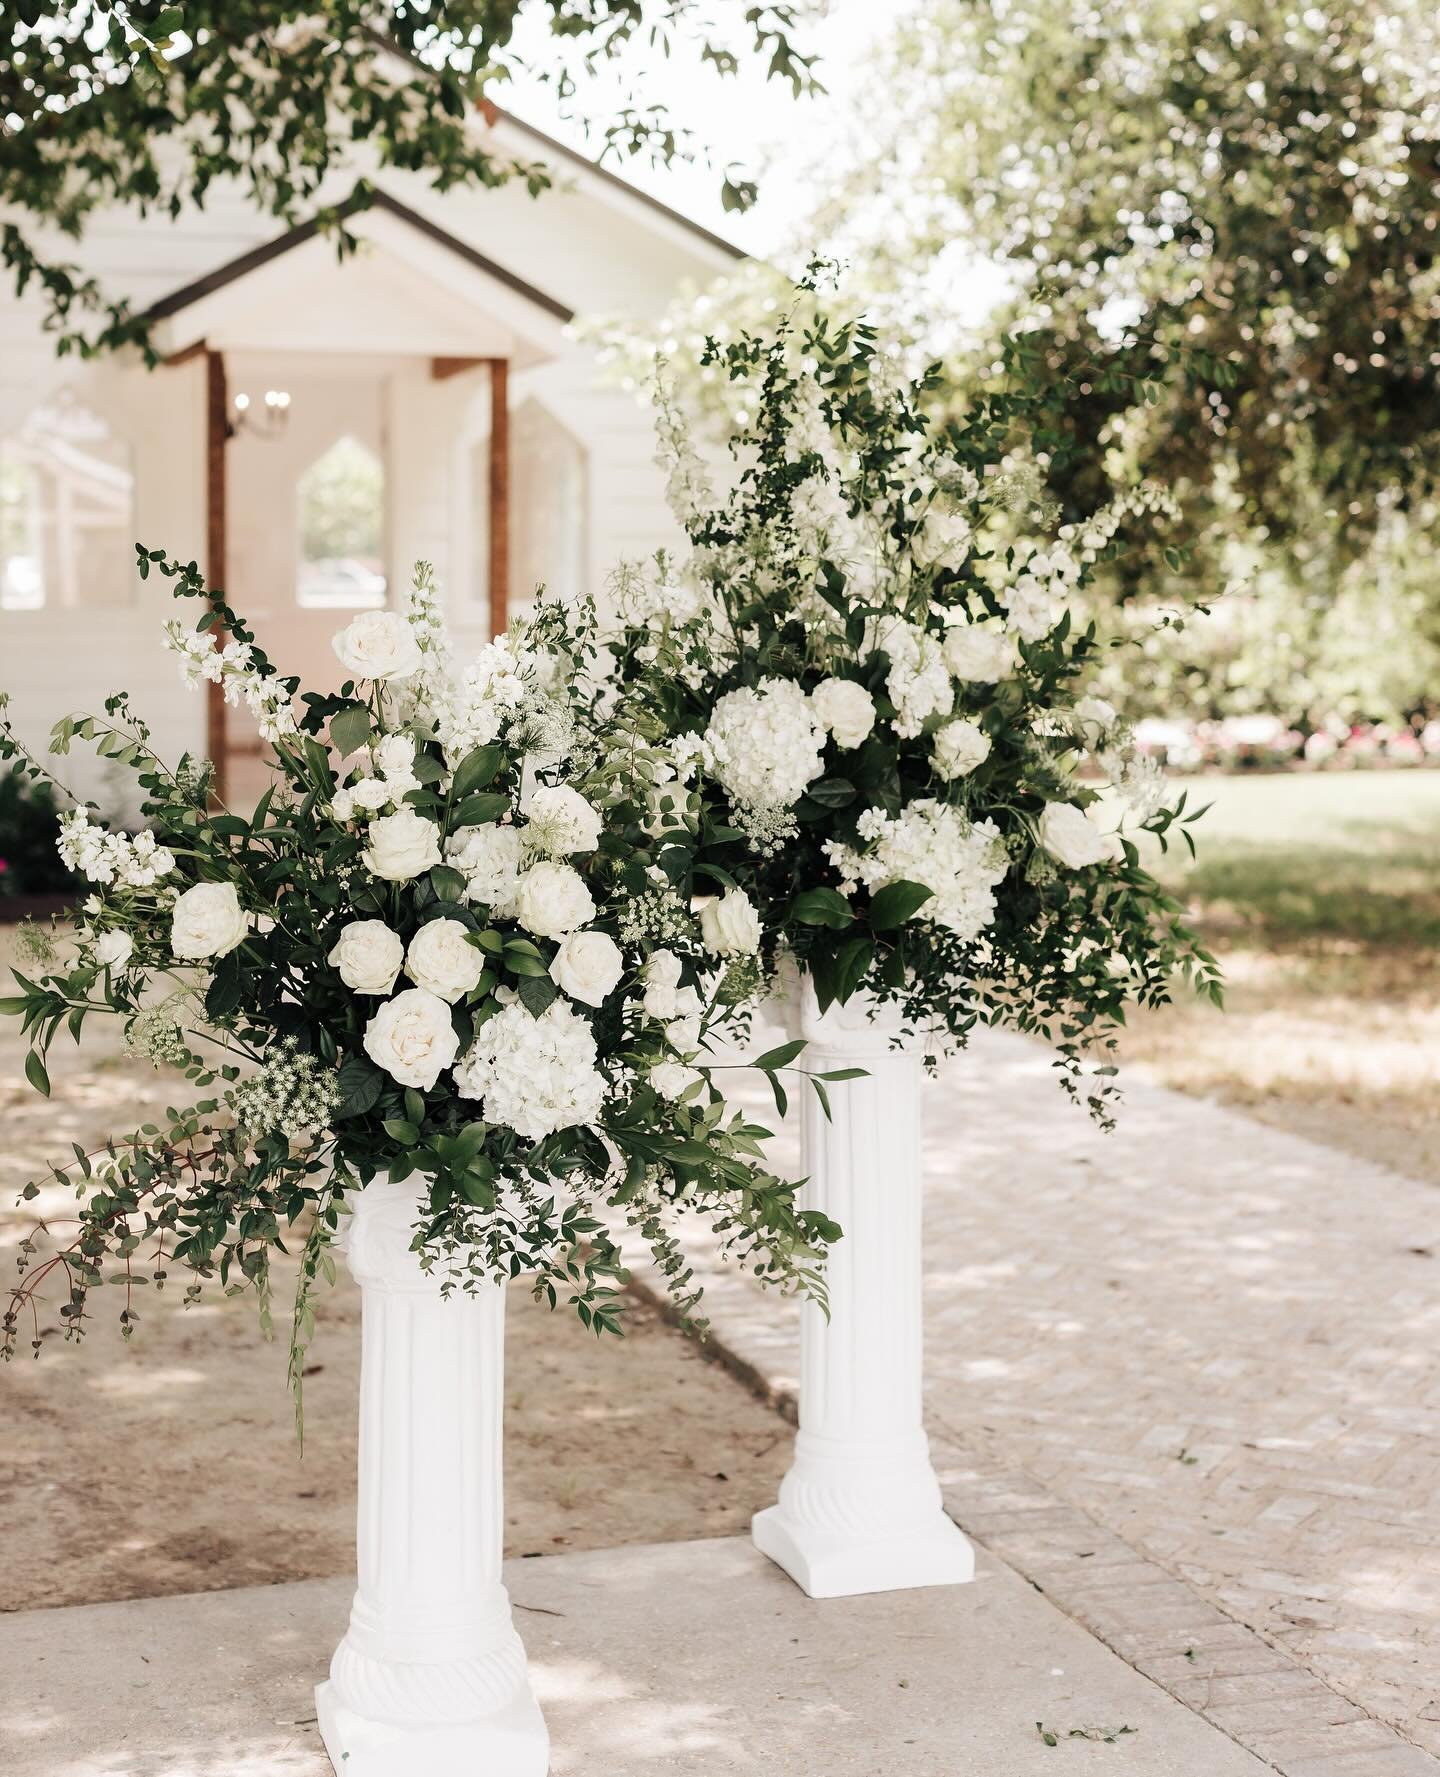 We always love working at The Greenery ⁠ - it&rsquo;s a versatile space that is equal parts cozy and welcoming, yet chic and modern. Which was exactly what Jade + Hunter&rsquo;s wedding was! ⁠
⁠
Wedding Planner: @havenceleste with @bontemps.eventplan